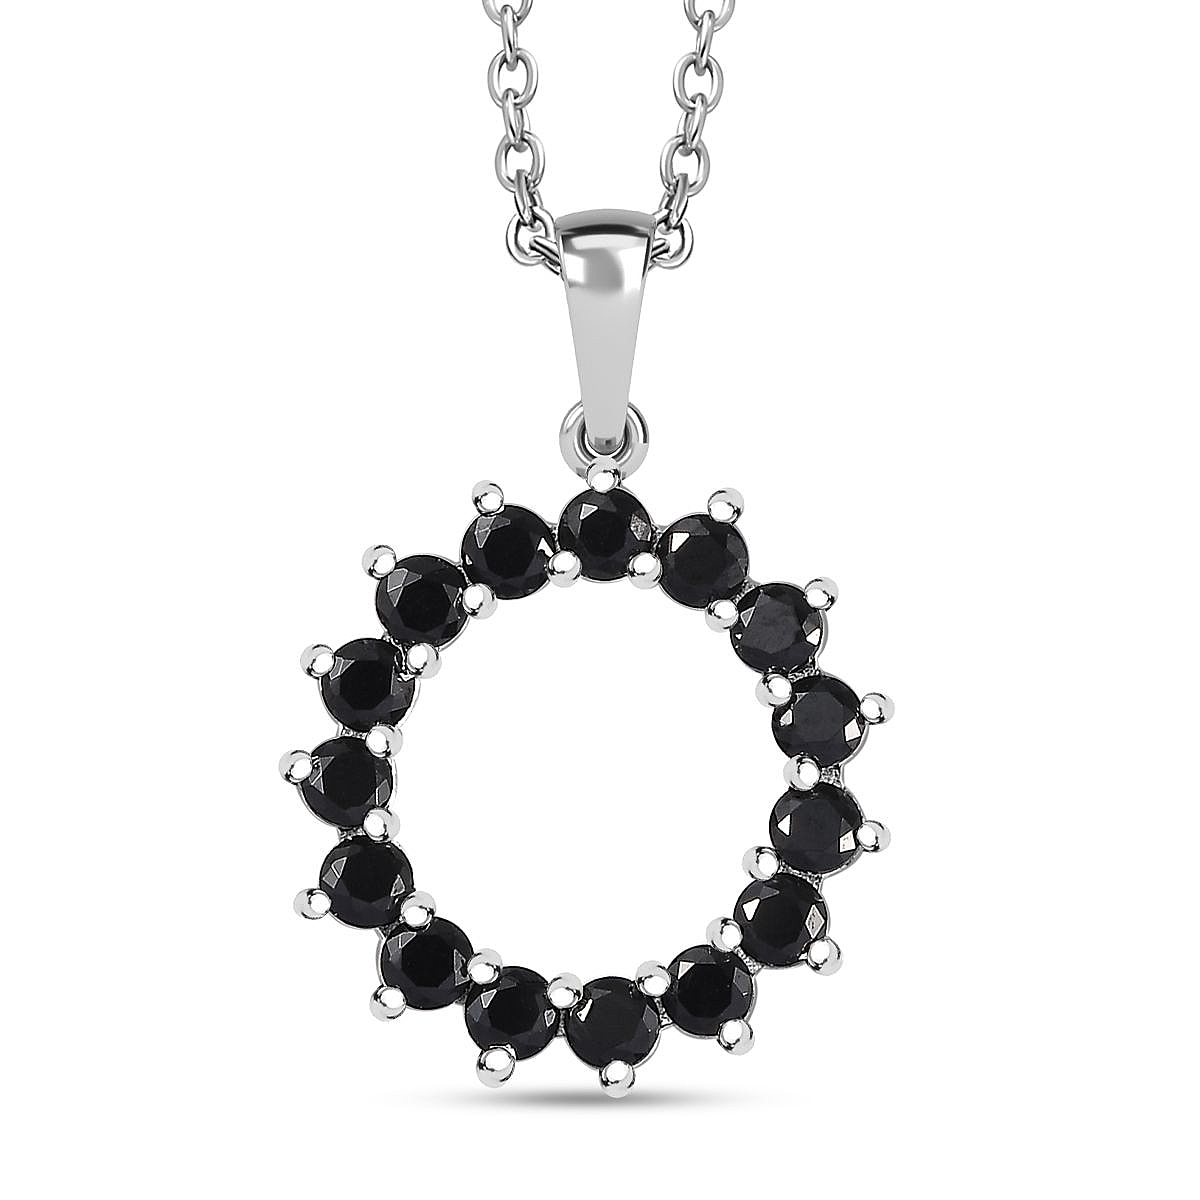 Boi Ploi Black Spinel Sterling Silver Circle Pendant with Stainless Steel Chain (Size 20), 1.65 Ct.